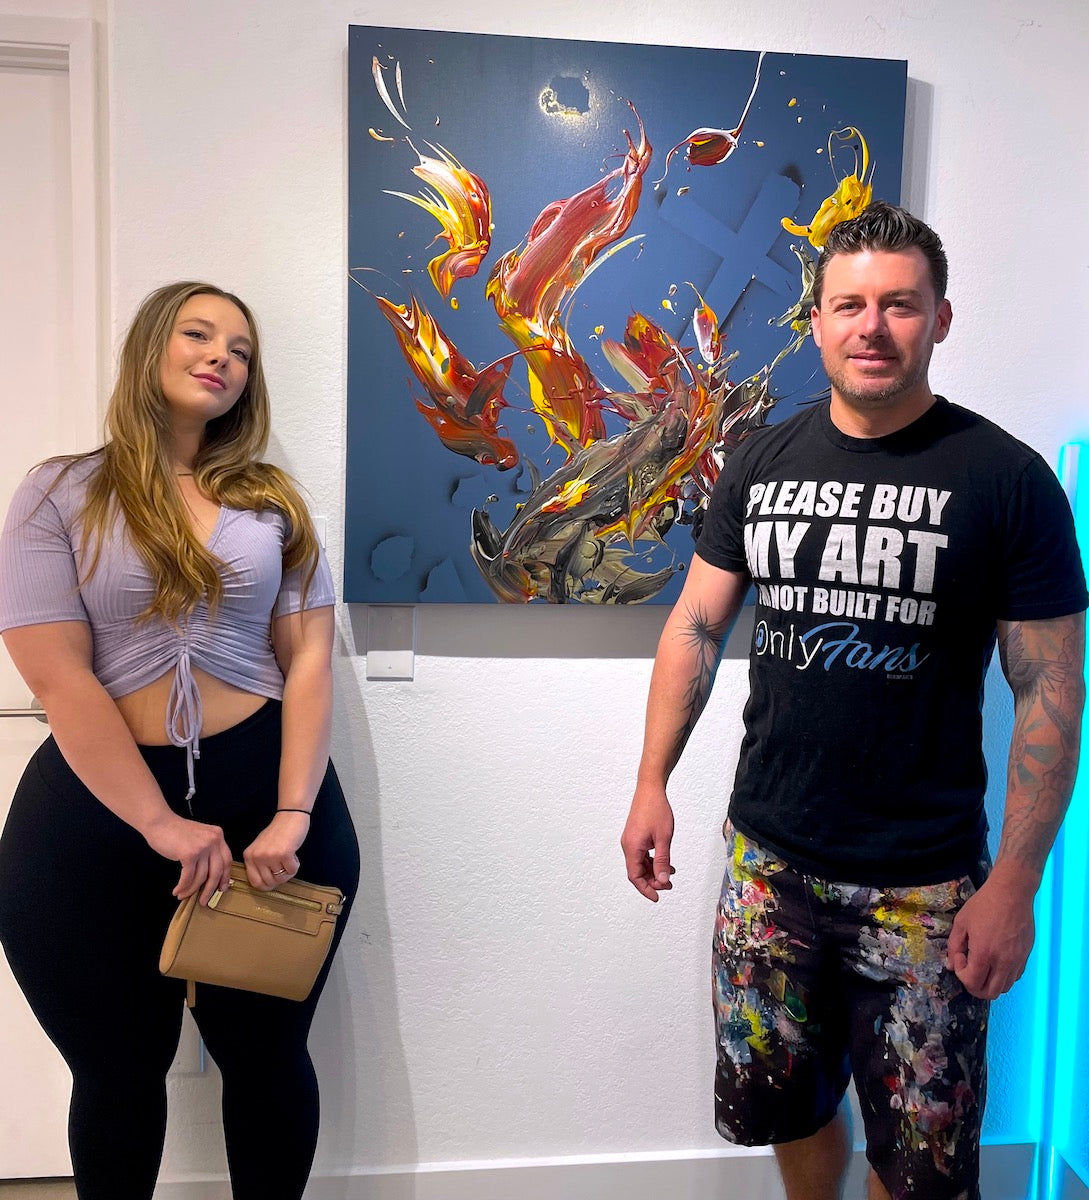 Michael Carini with Instagram model Colors of Autumn for an art opening highlighting Carini's work on exhibit at an art gallery in La Jolla, CA.